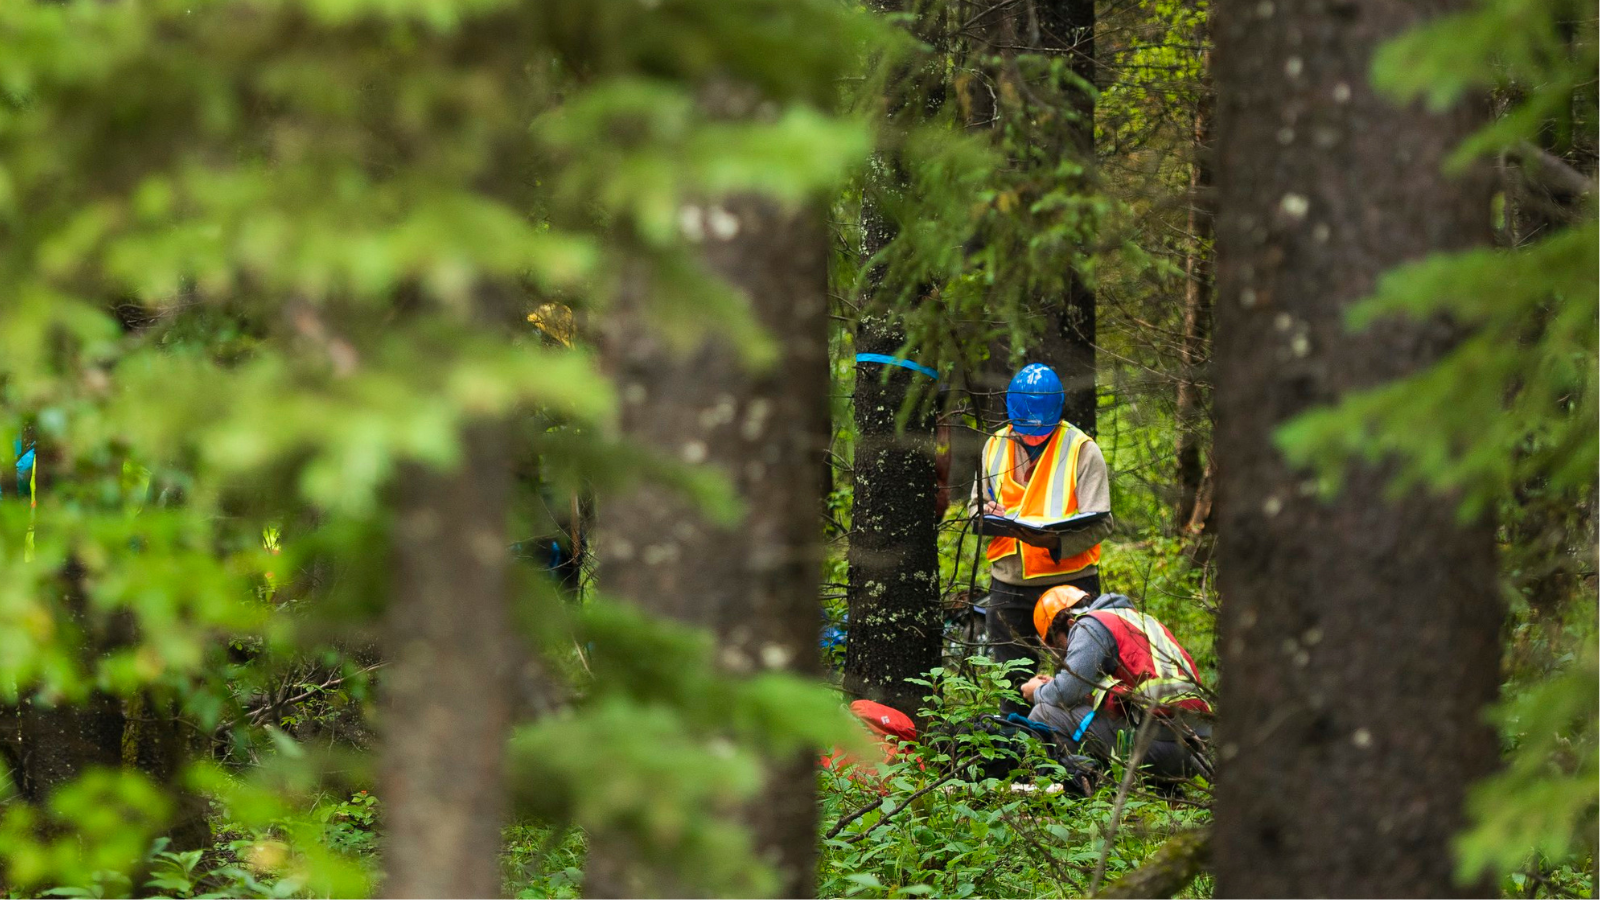 Deep in a Alberta forest, students dressed in safety equipment evaluate the trees